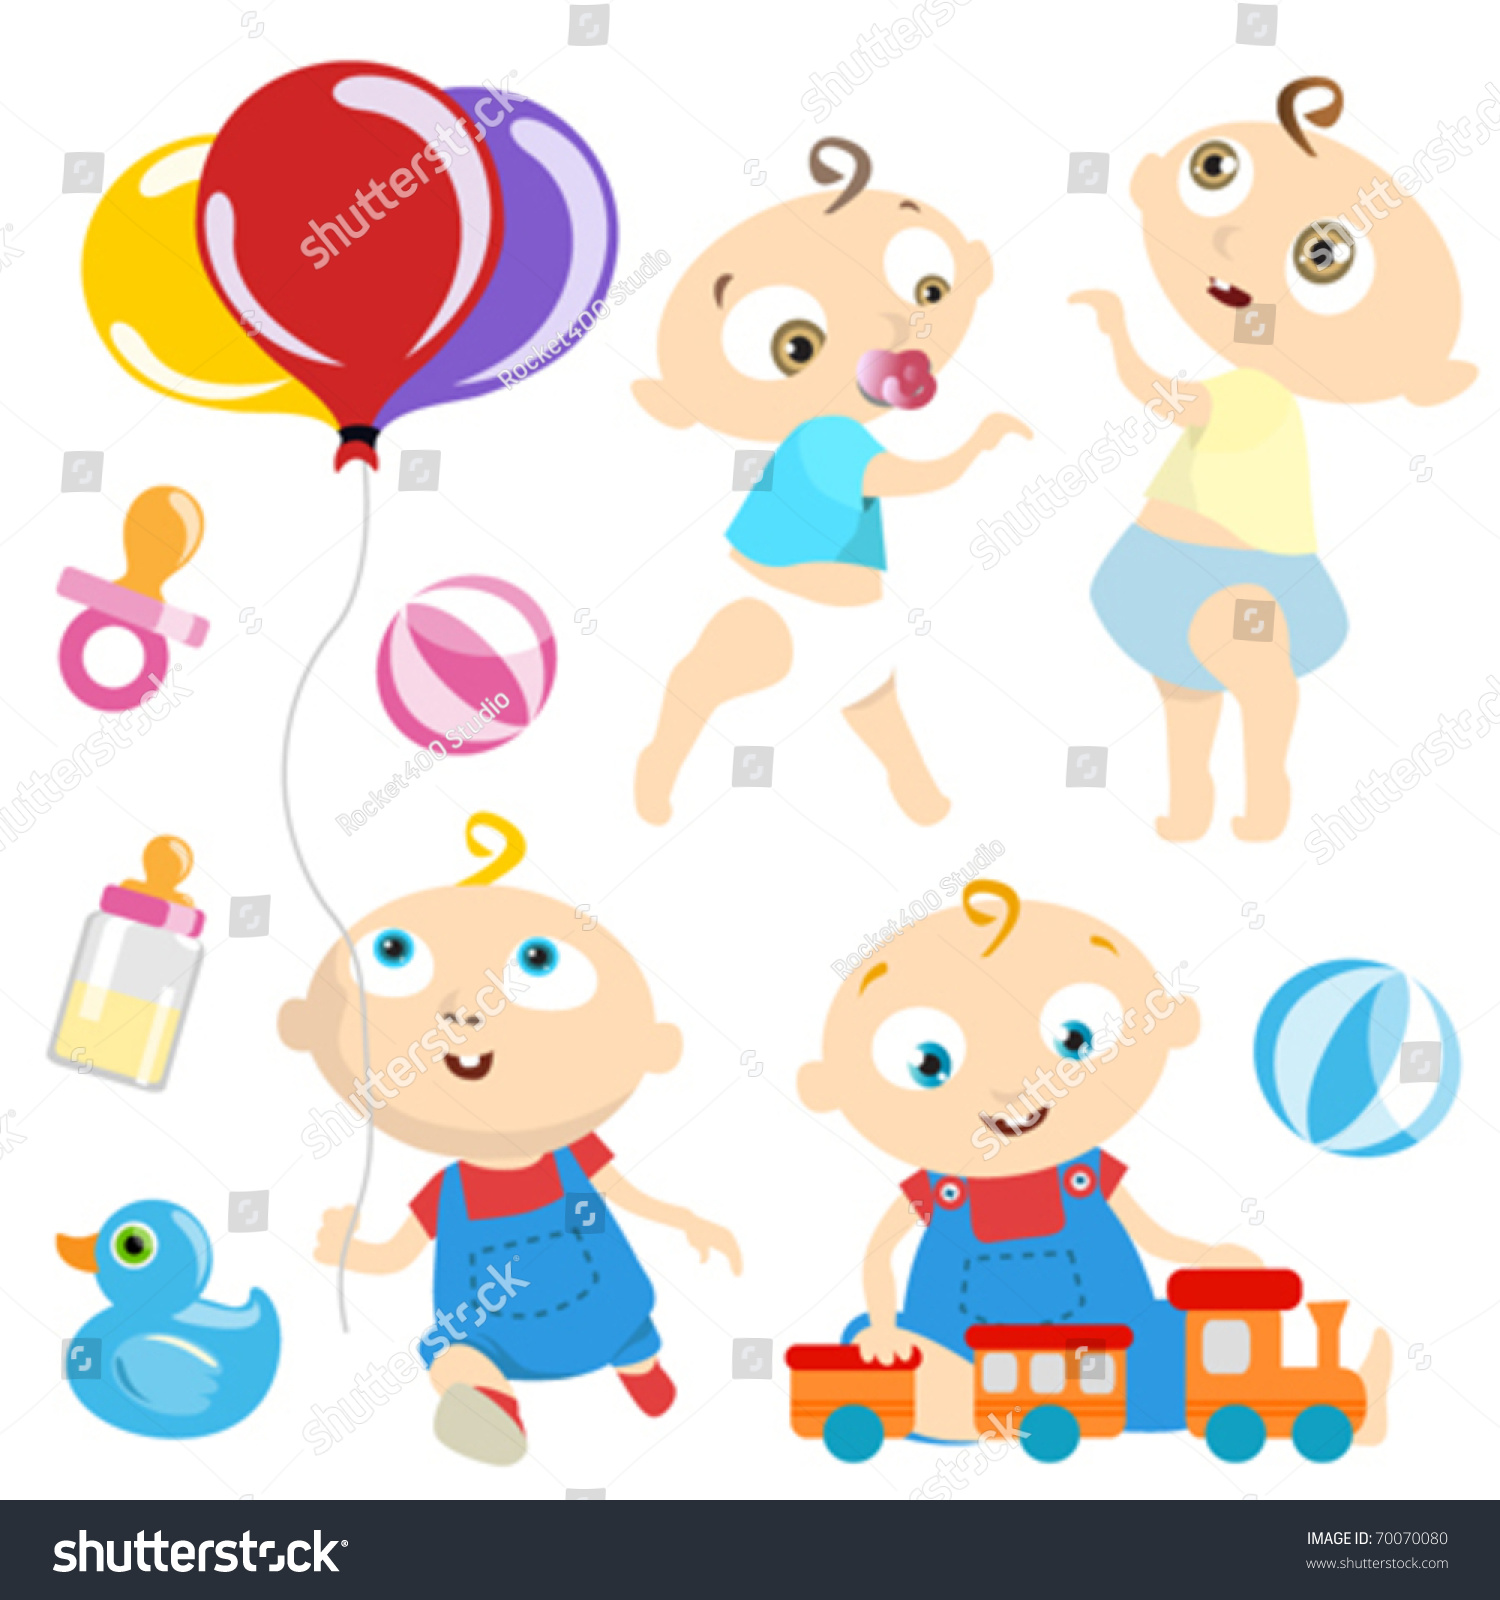 Baby With Toy Vector - 70070080 : Shutterstock